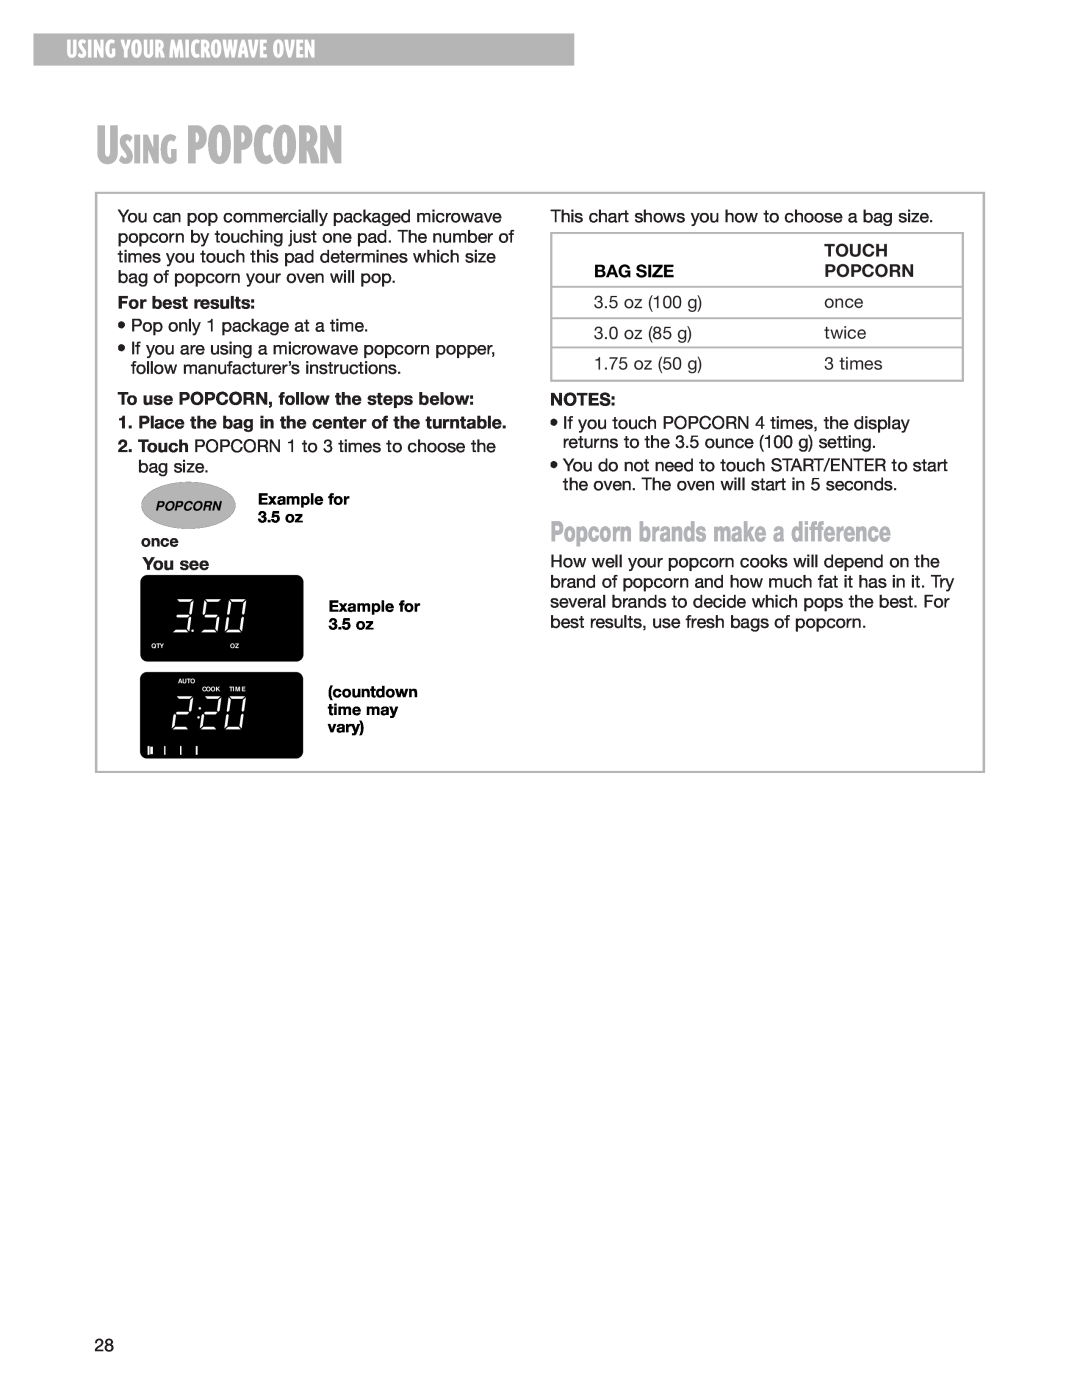 Whirlpool MH8150XJ installation instructions Using Popcorn, Popcorn brands make a difference, Using Your Microwave Oven 